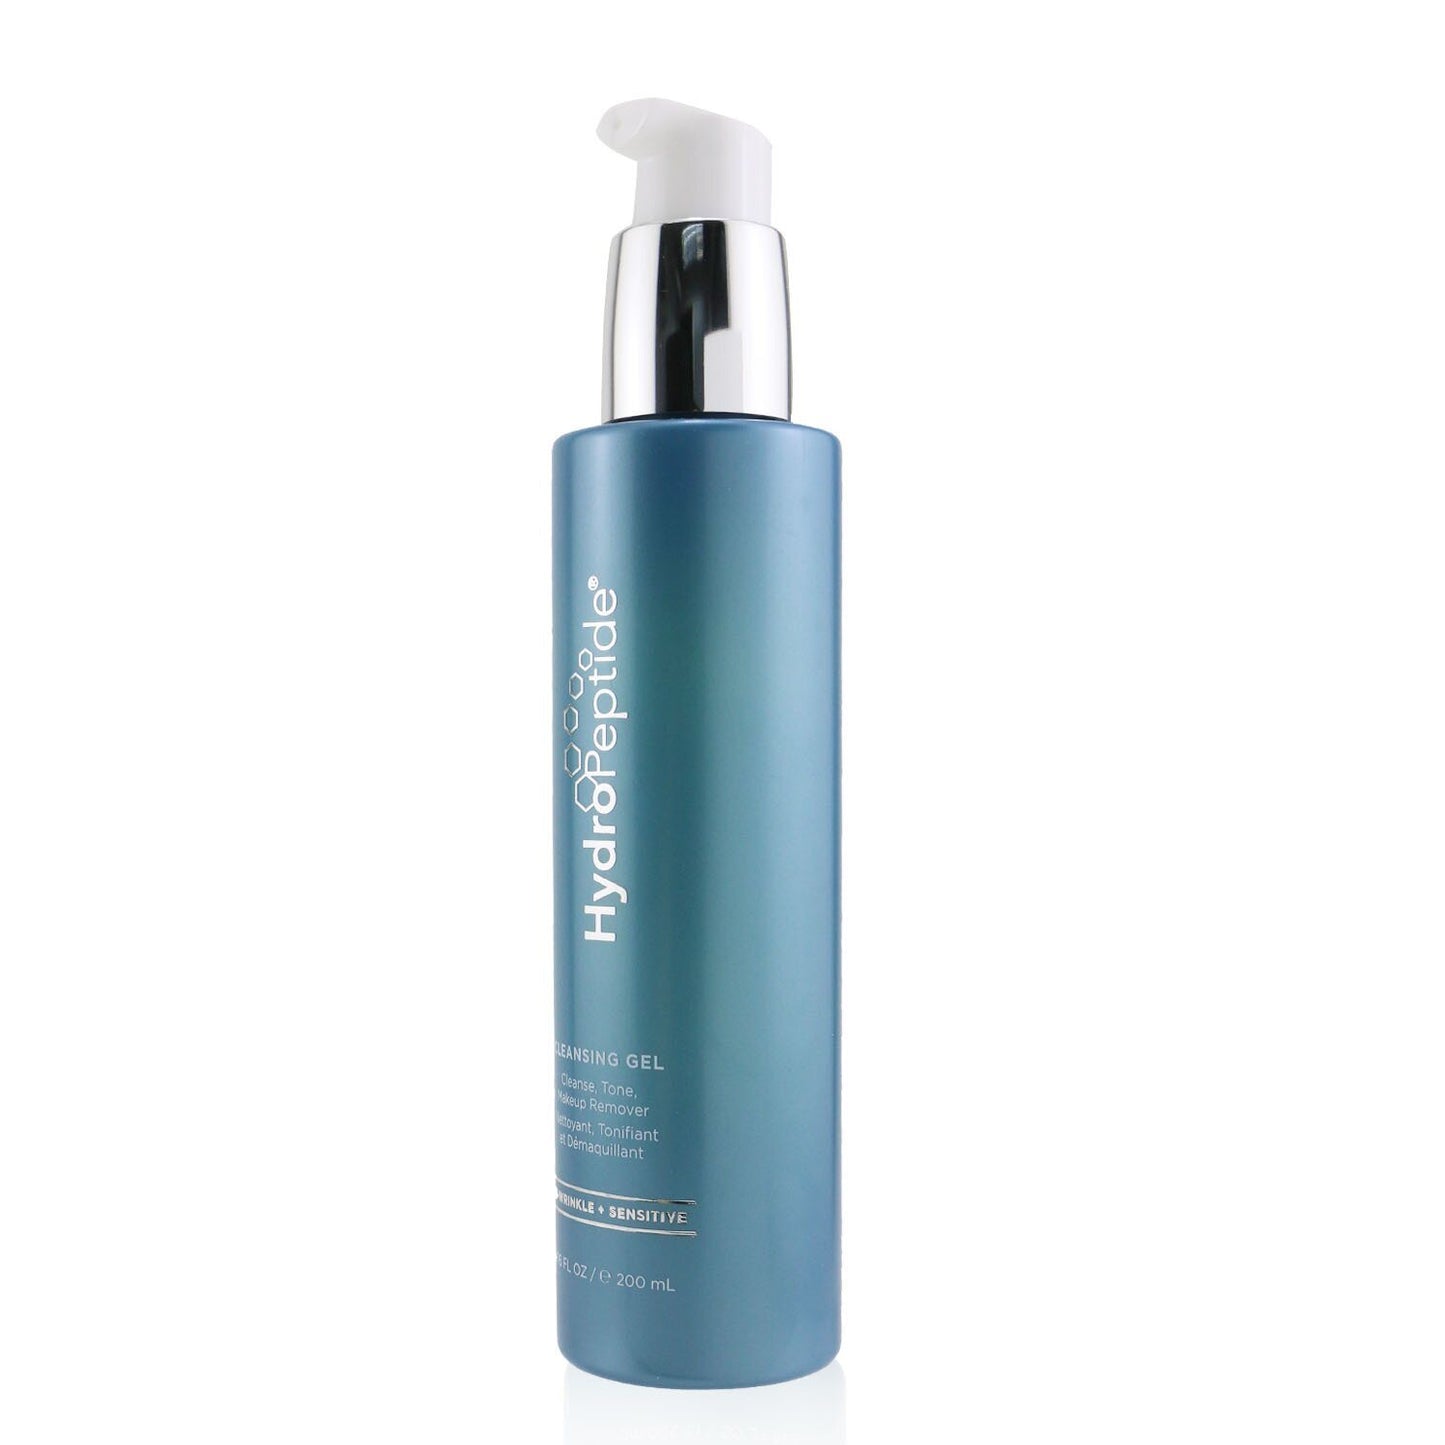 HYDROPEPTIDE - Cleansing Gel - Gentle Cleanse, Tone, Make-up Remover HPCG01 200ml/6.76oz